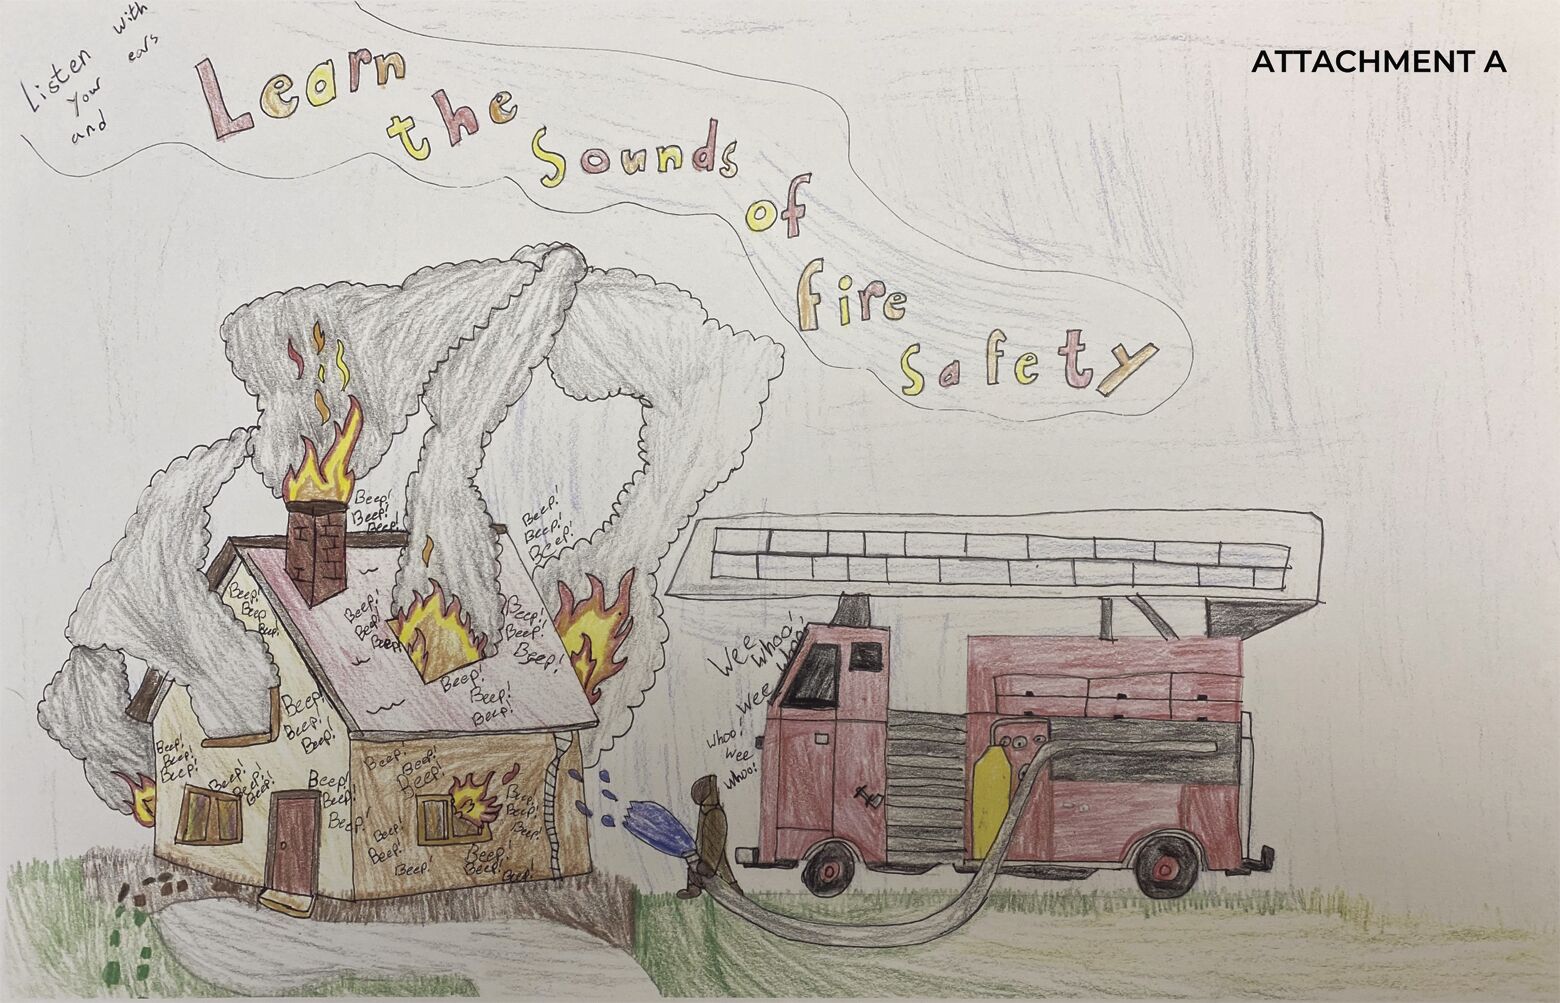 West Main Students Win Fire Safety Poster Contest - Ravenna City Schools -  Ohio